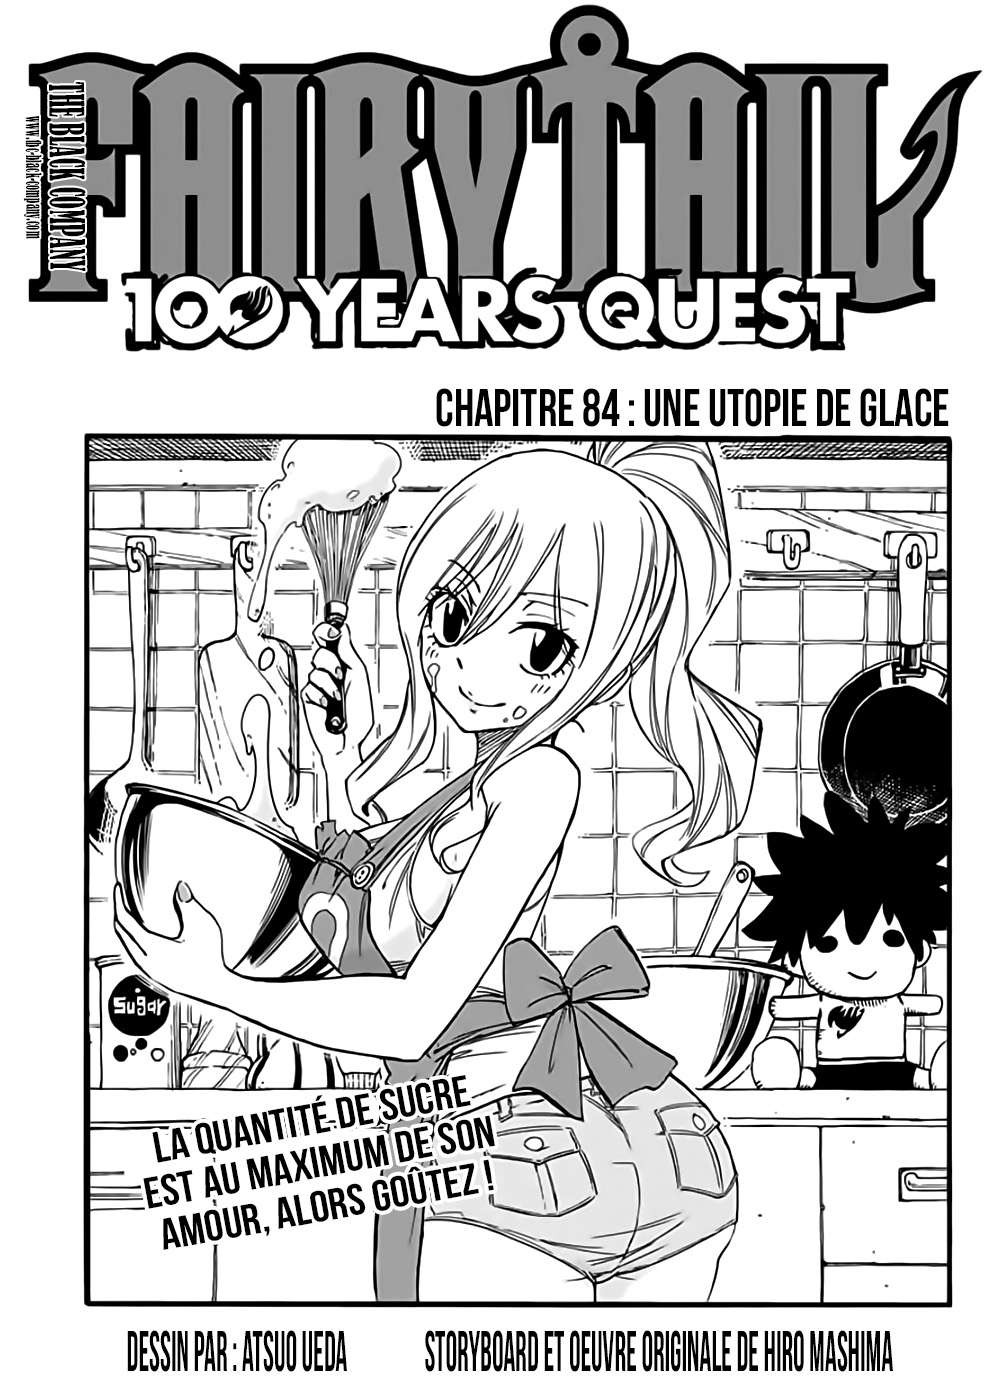 Fairy Tail 100 Years Quest: Chapter 84 - Page 1